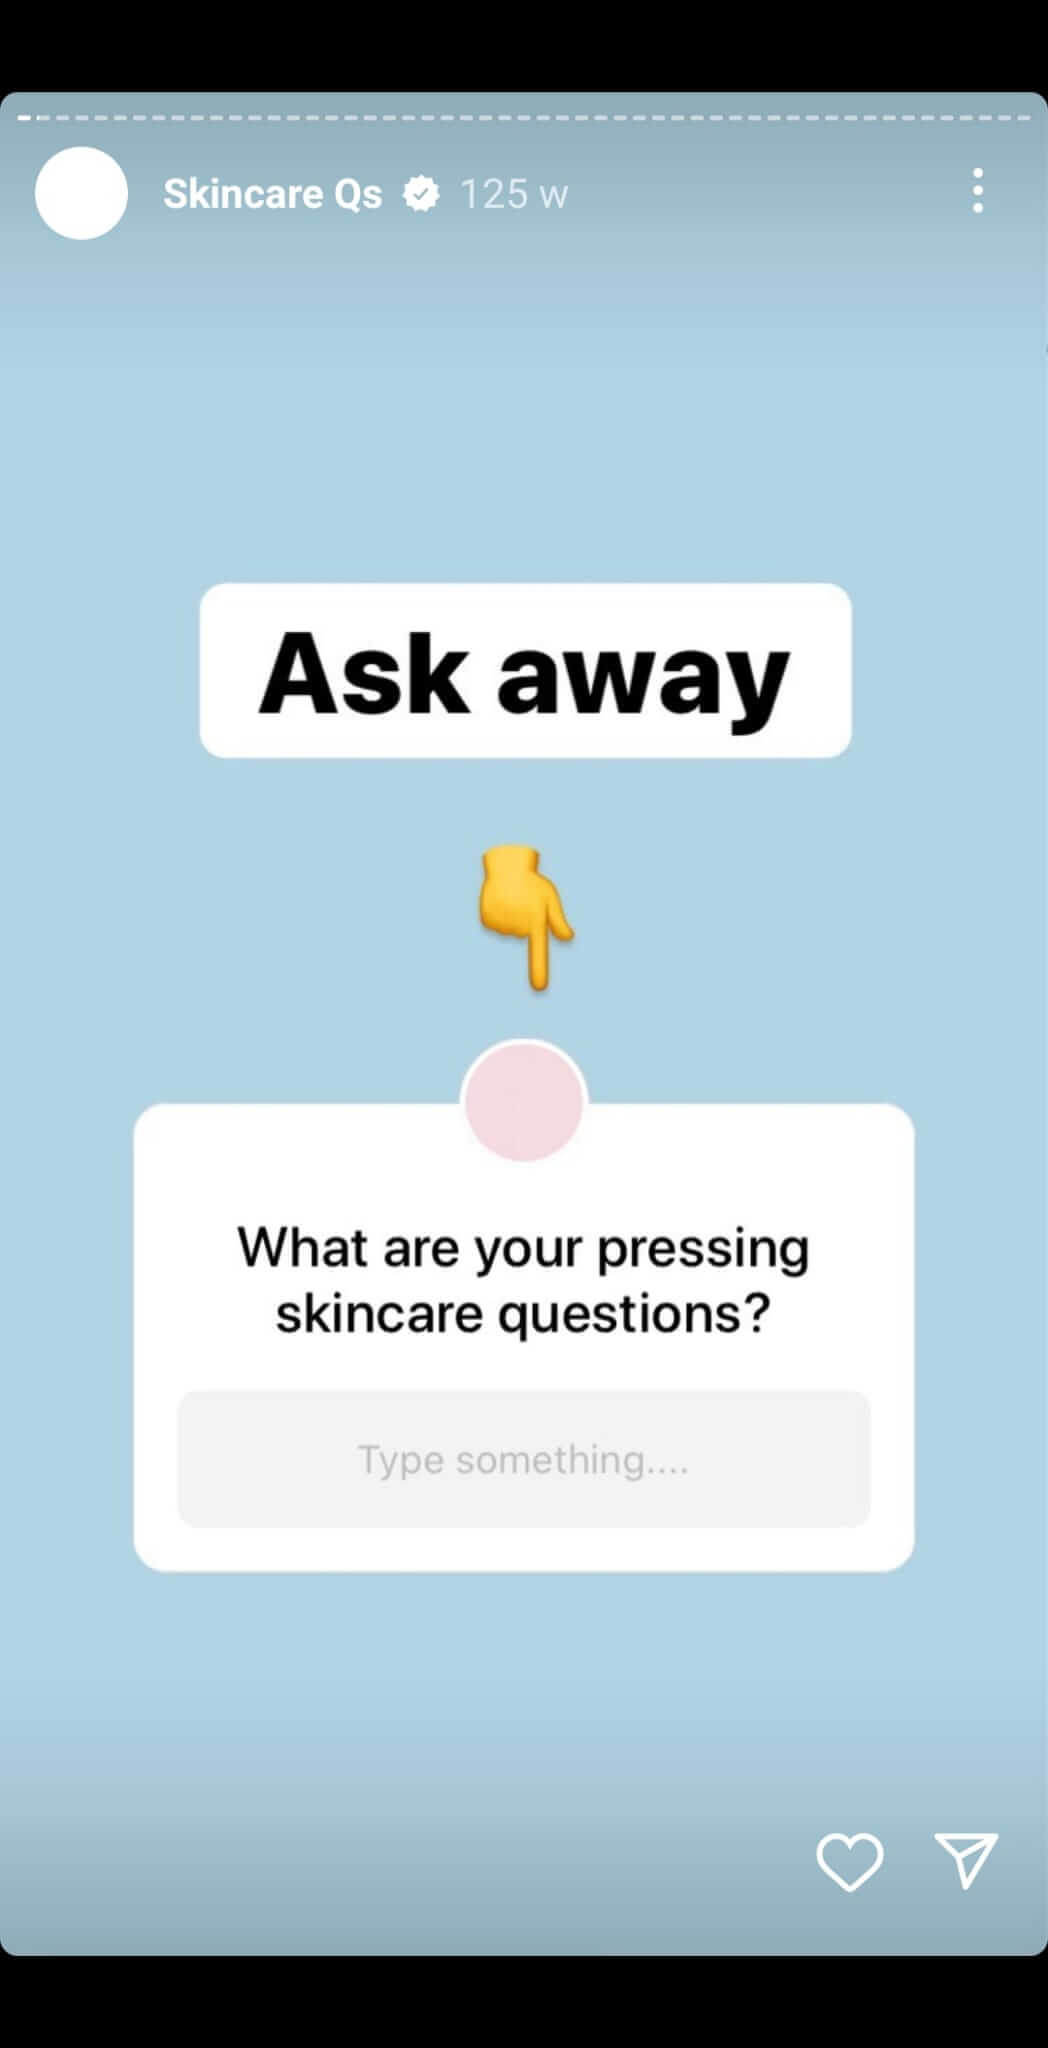 instagram-glossier-story-polls-survey-content-example